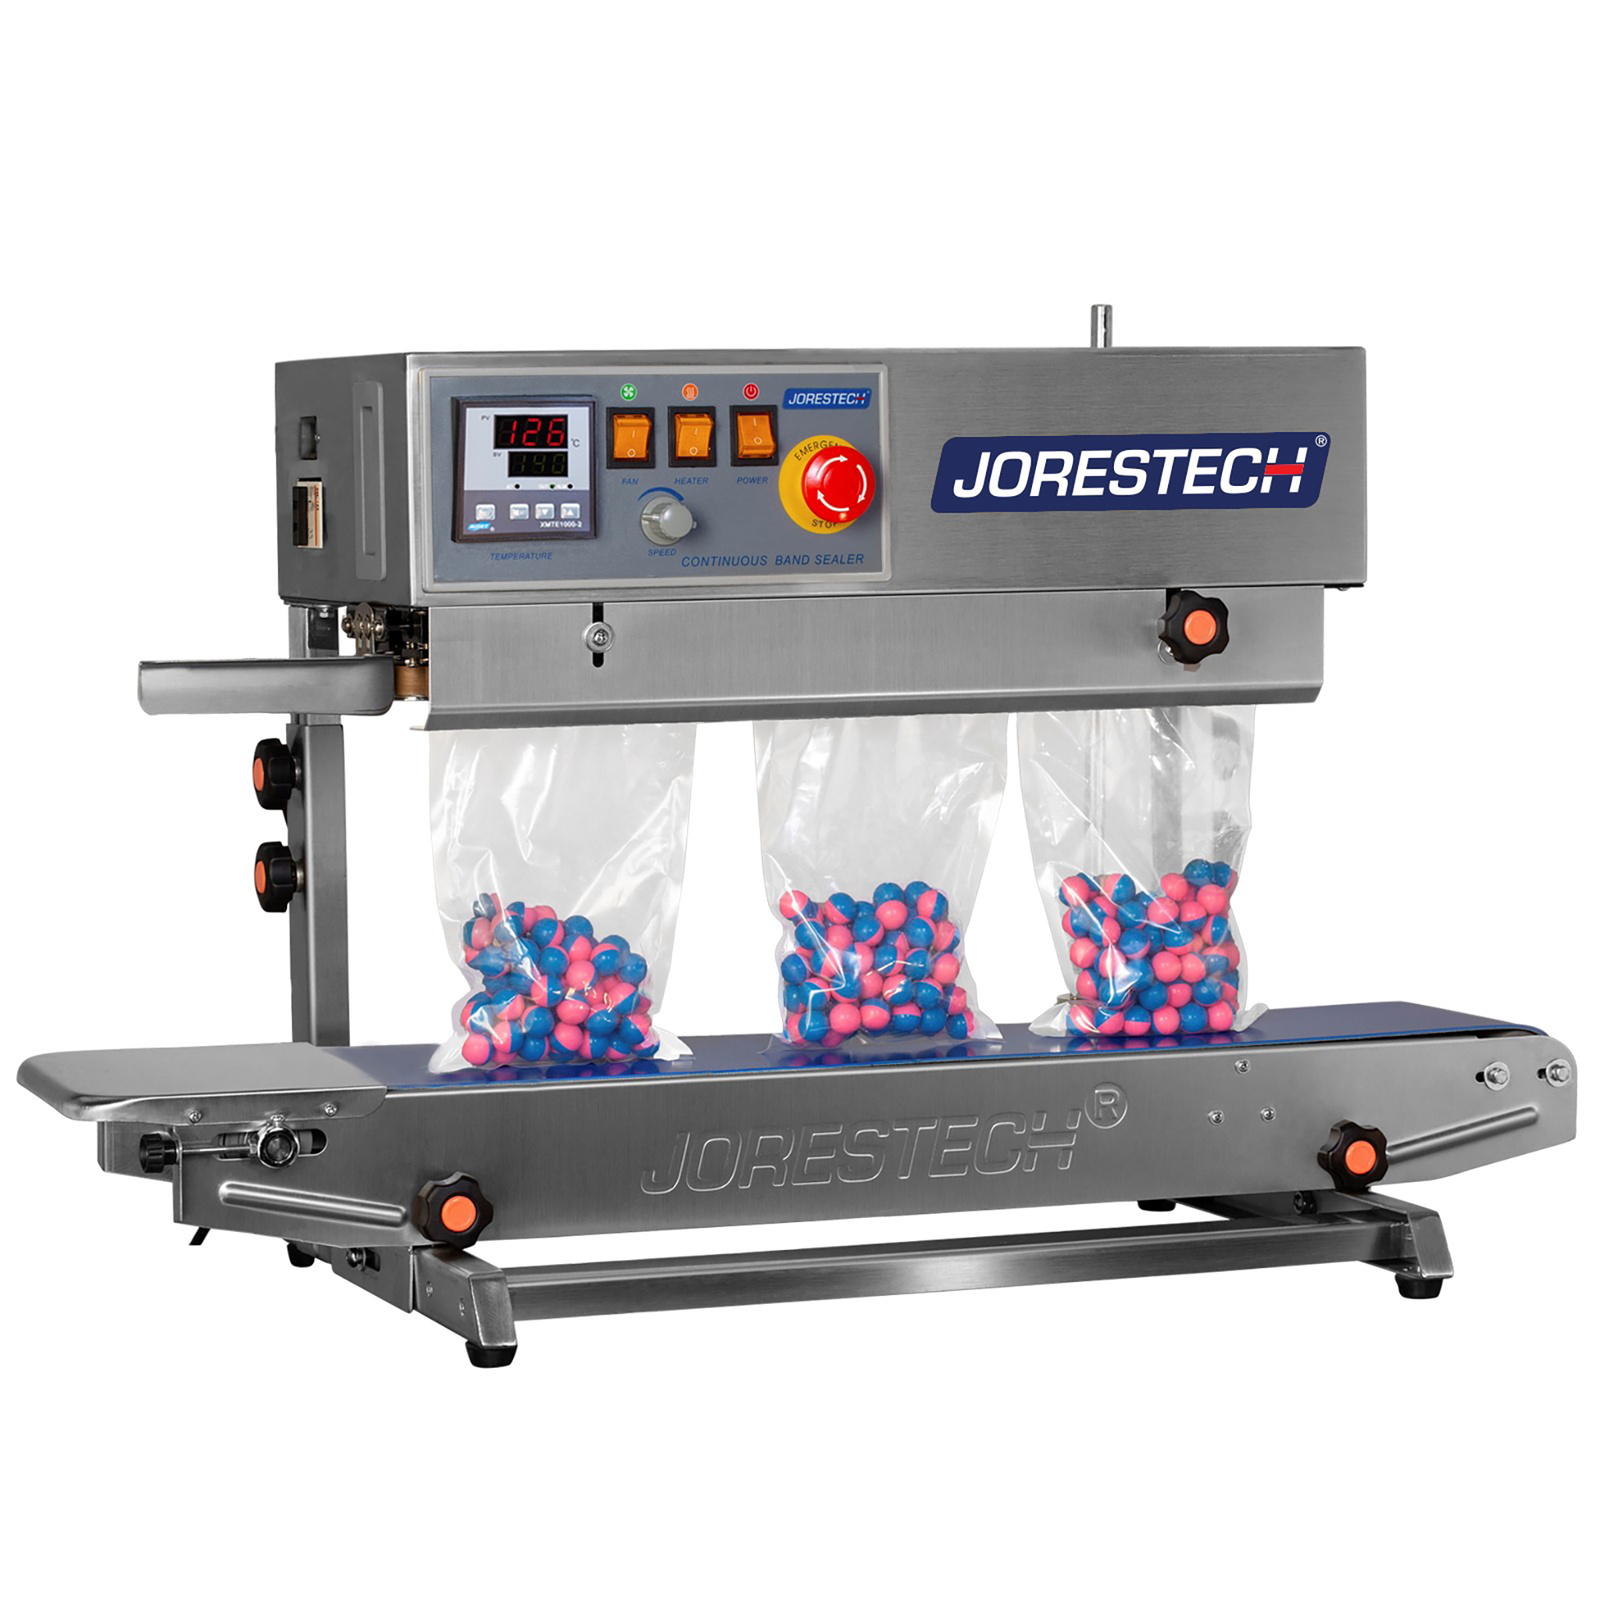 front view of the JORESTECH stainless steel left to right continuous band sealer. The table top Vertical bag sealer is sealing a production of plastic bags filled with blue and pink paint balls